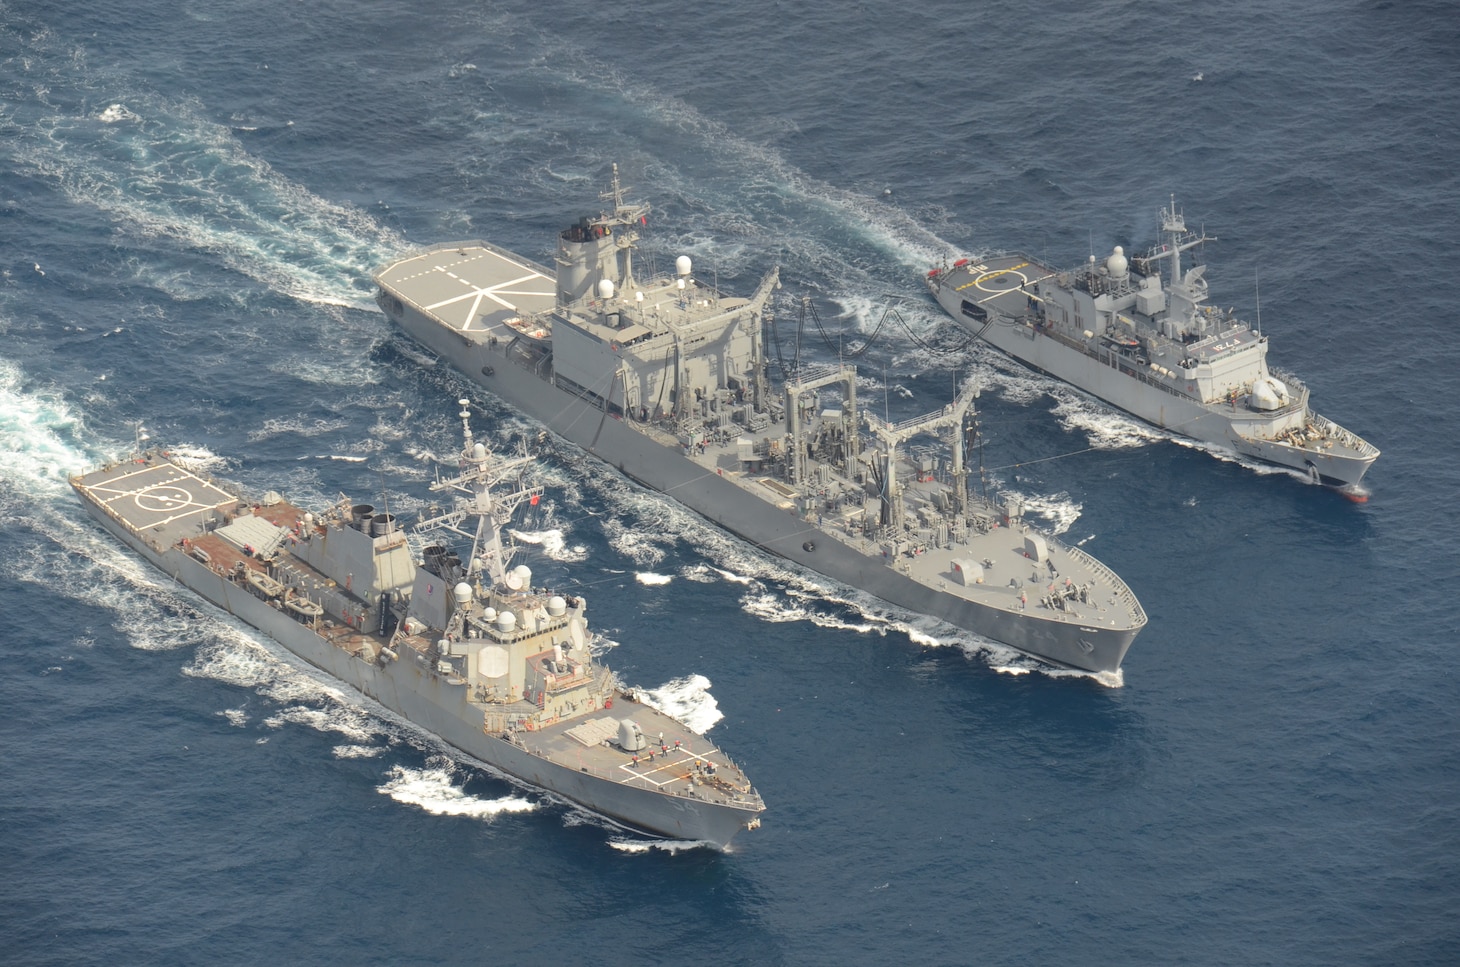 The Arleigh Burke-class guided-missile destroyer USS Curtis Wilbur (DDG 54) conducts a replenishment-at-sea with the Japan Maritime Self-Defense Force Towada-class replenishment ship JS Hamana (AOE 424) and French Floreal-class light frigate FNS Prairial (F731).